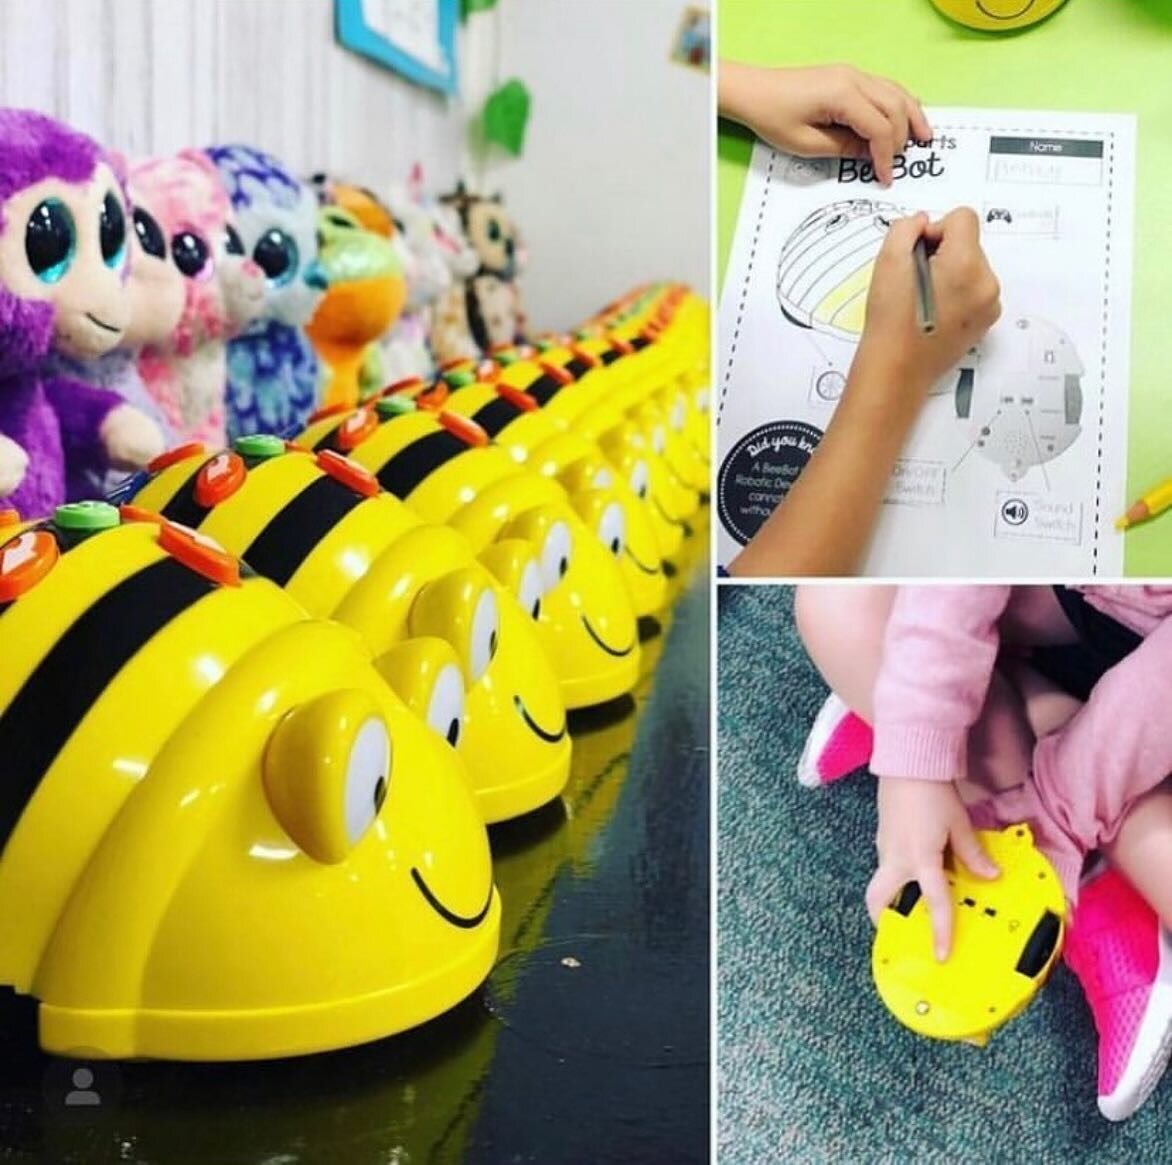 ⭐️ FREEBIE ⭐️ 

I LOVED using BeeBots with my class 🐝🙌🏻

We had them out Every. Single. Day 🫶

Half of the time they were brought out with the coding mats to experiment with and develop important early coding skills opportunities. This was done w